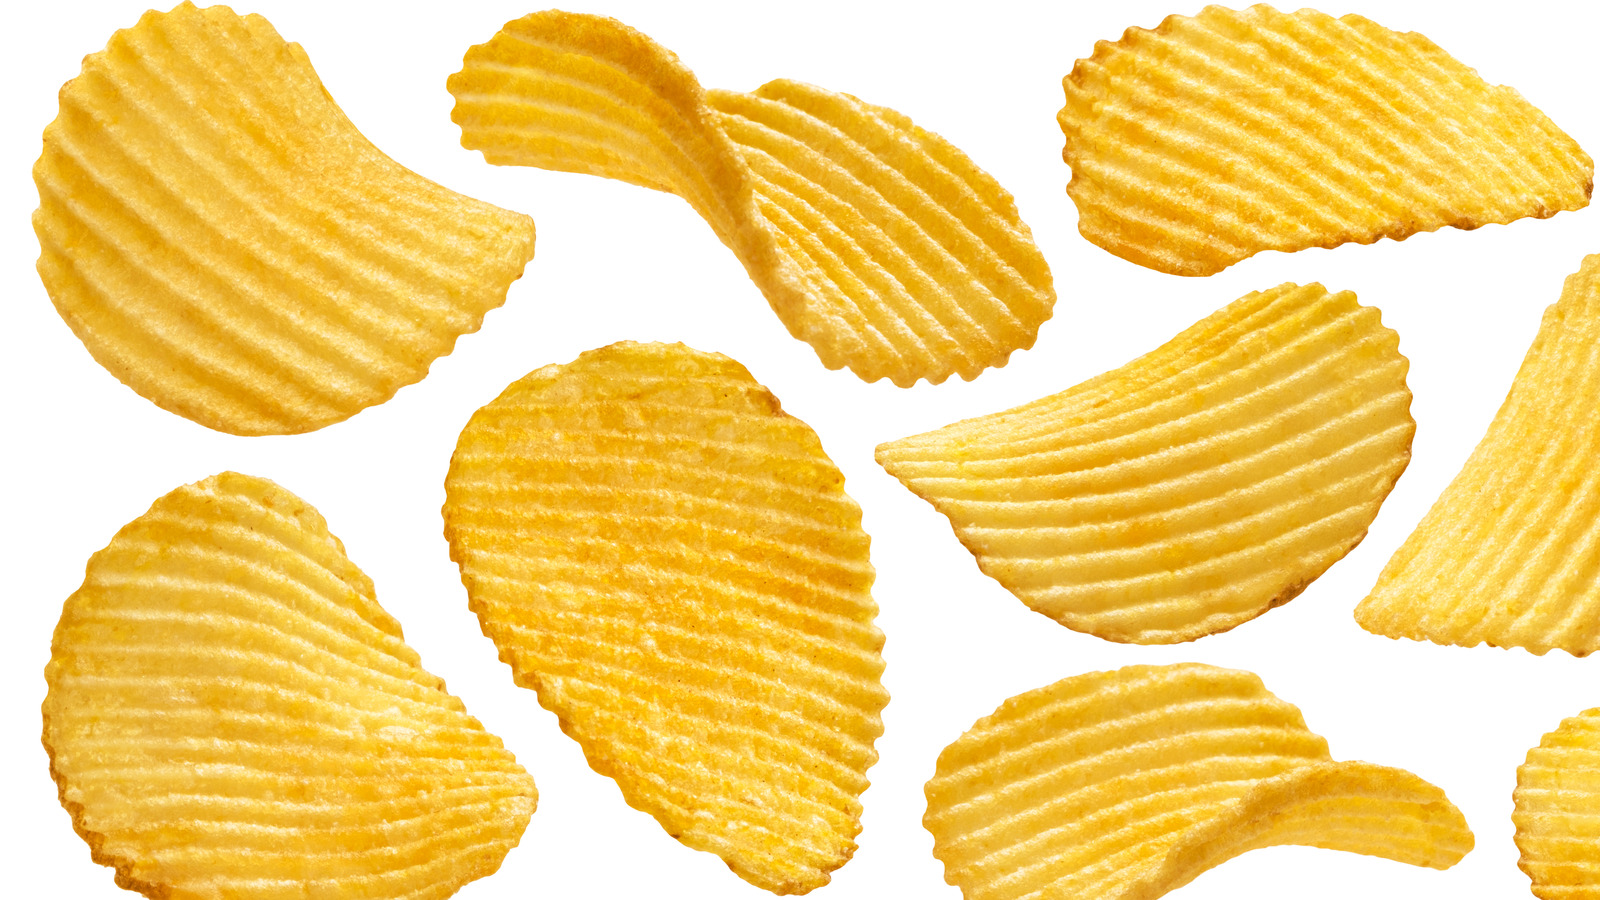 https://www.mashed.com/img/gallery/mashed-exclusive-poll-uncovers-fans-favorite-brand-of-potato-chips/l-intro-1694812779.jpg